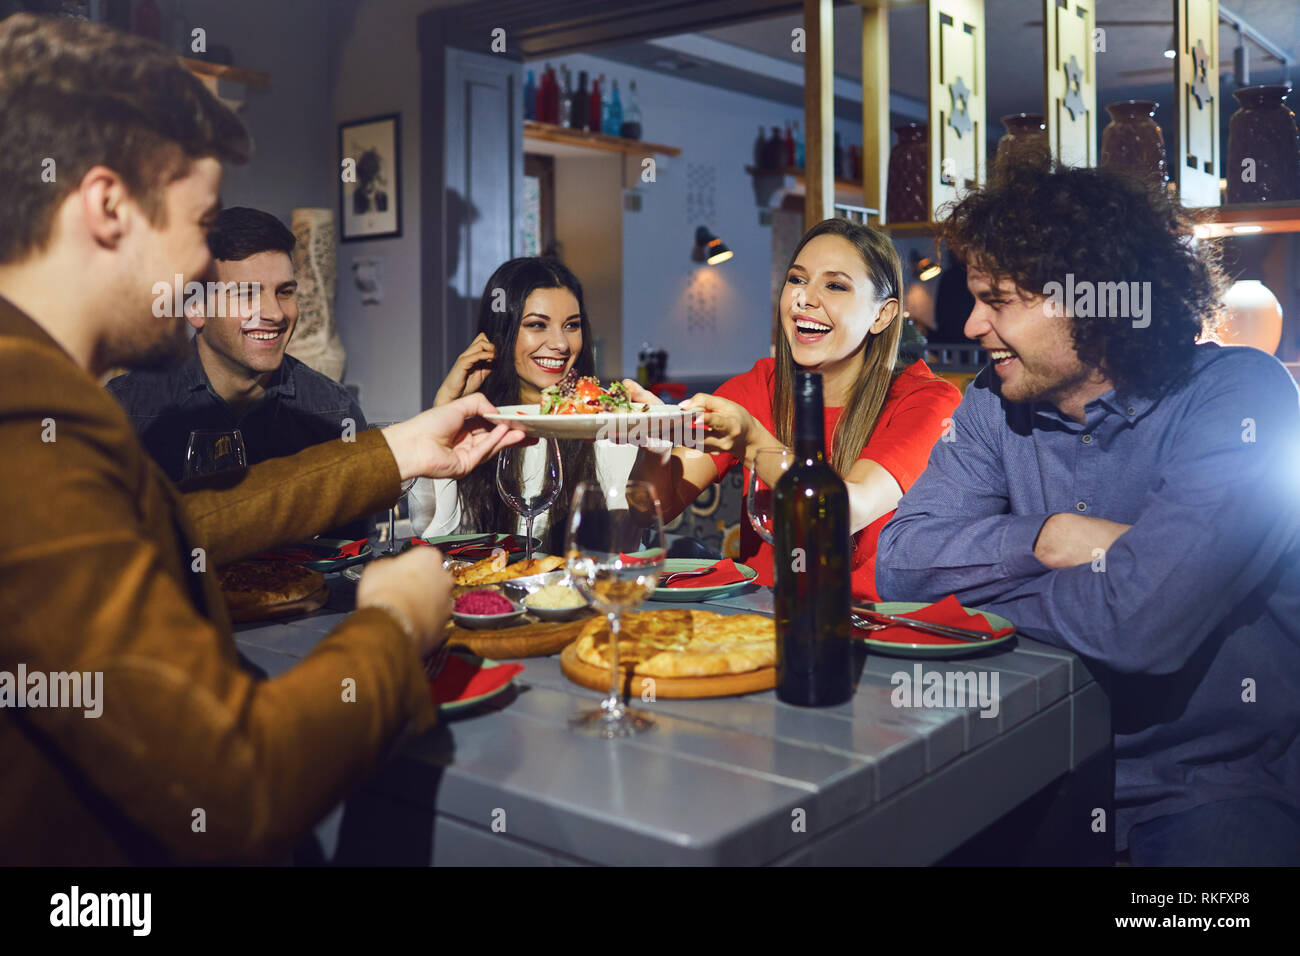 Friends eating at a dinner at a meeting in a restaurant. Stock Photo